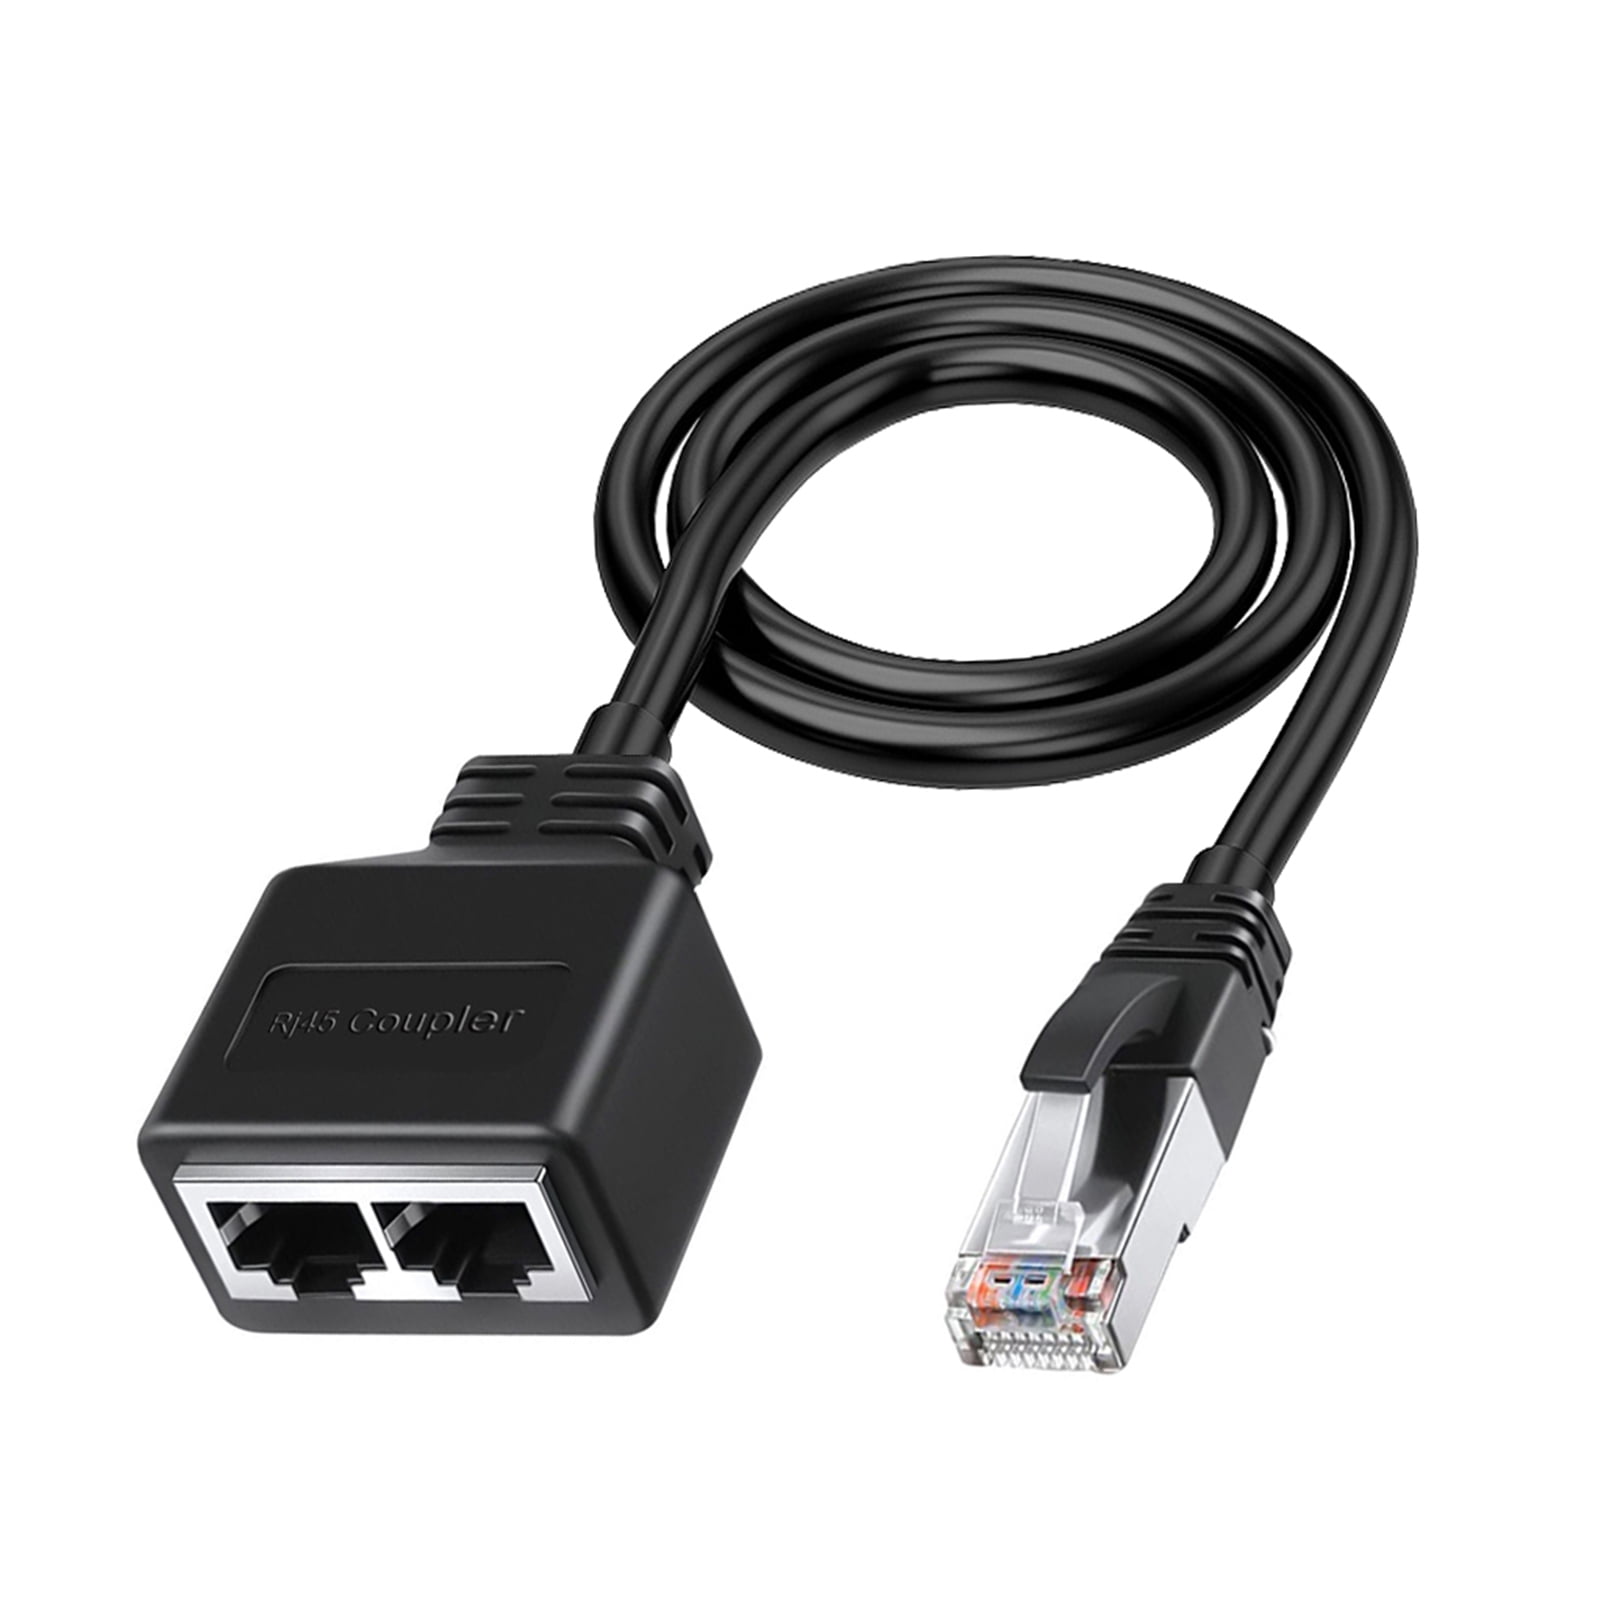 RJ45SPLITTER - StarTech.com 2-to-1 RJ45 10/100 Mbps Splitter/Combiner - One  adapter required at each end of the connection - network splitter - Currys  Business